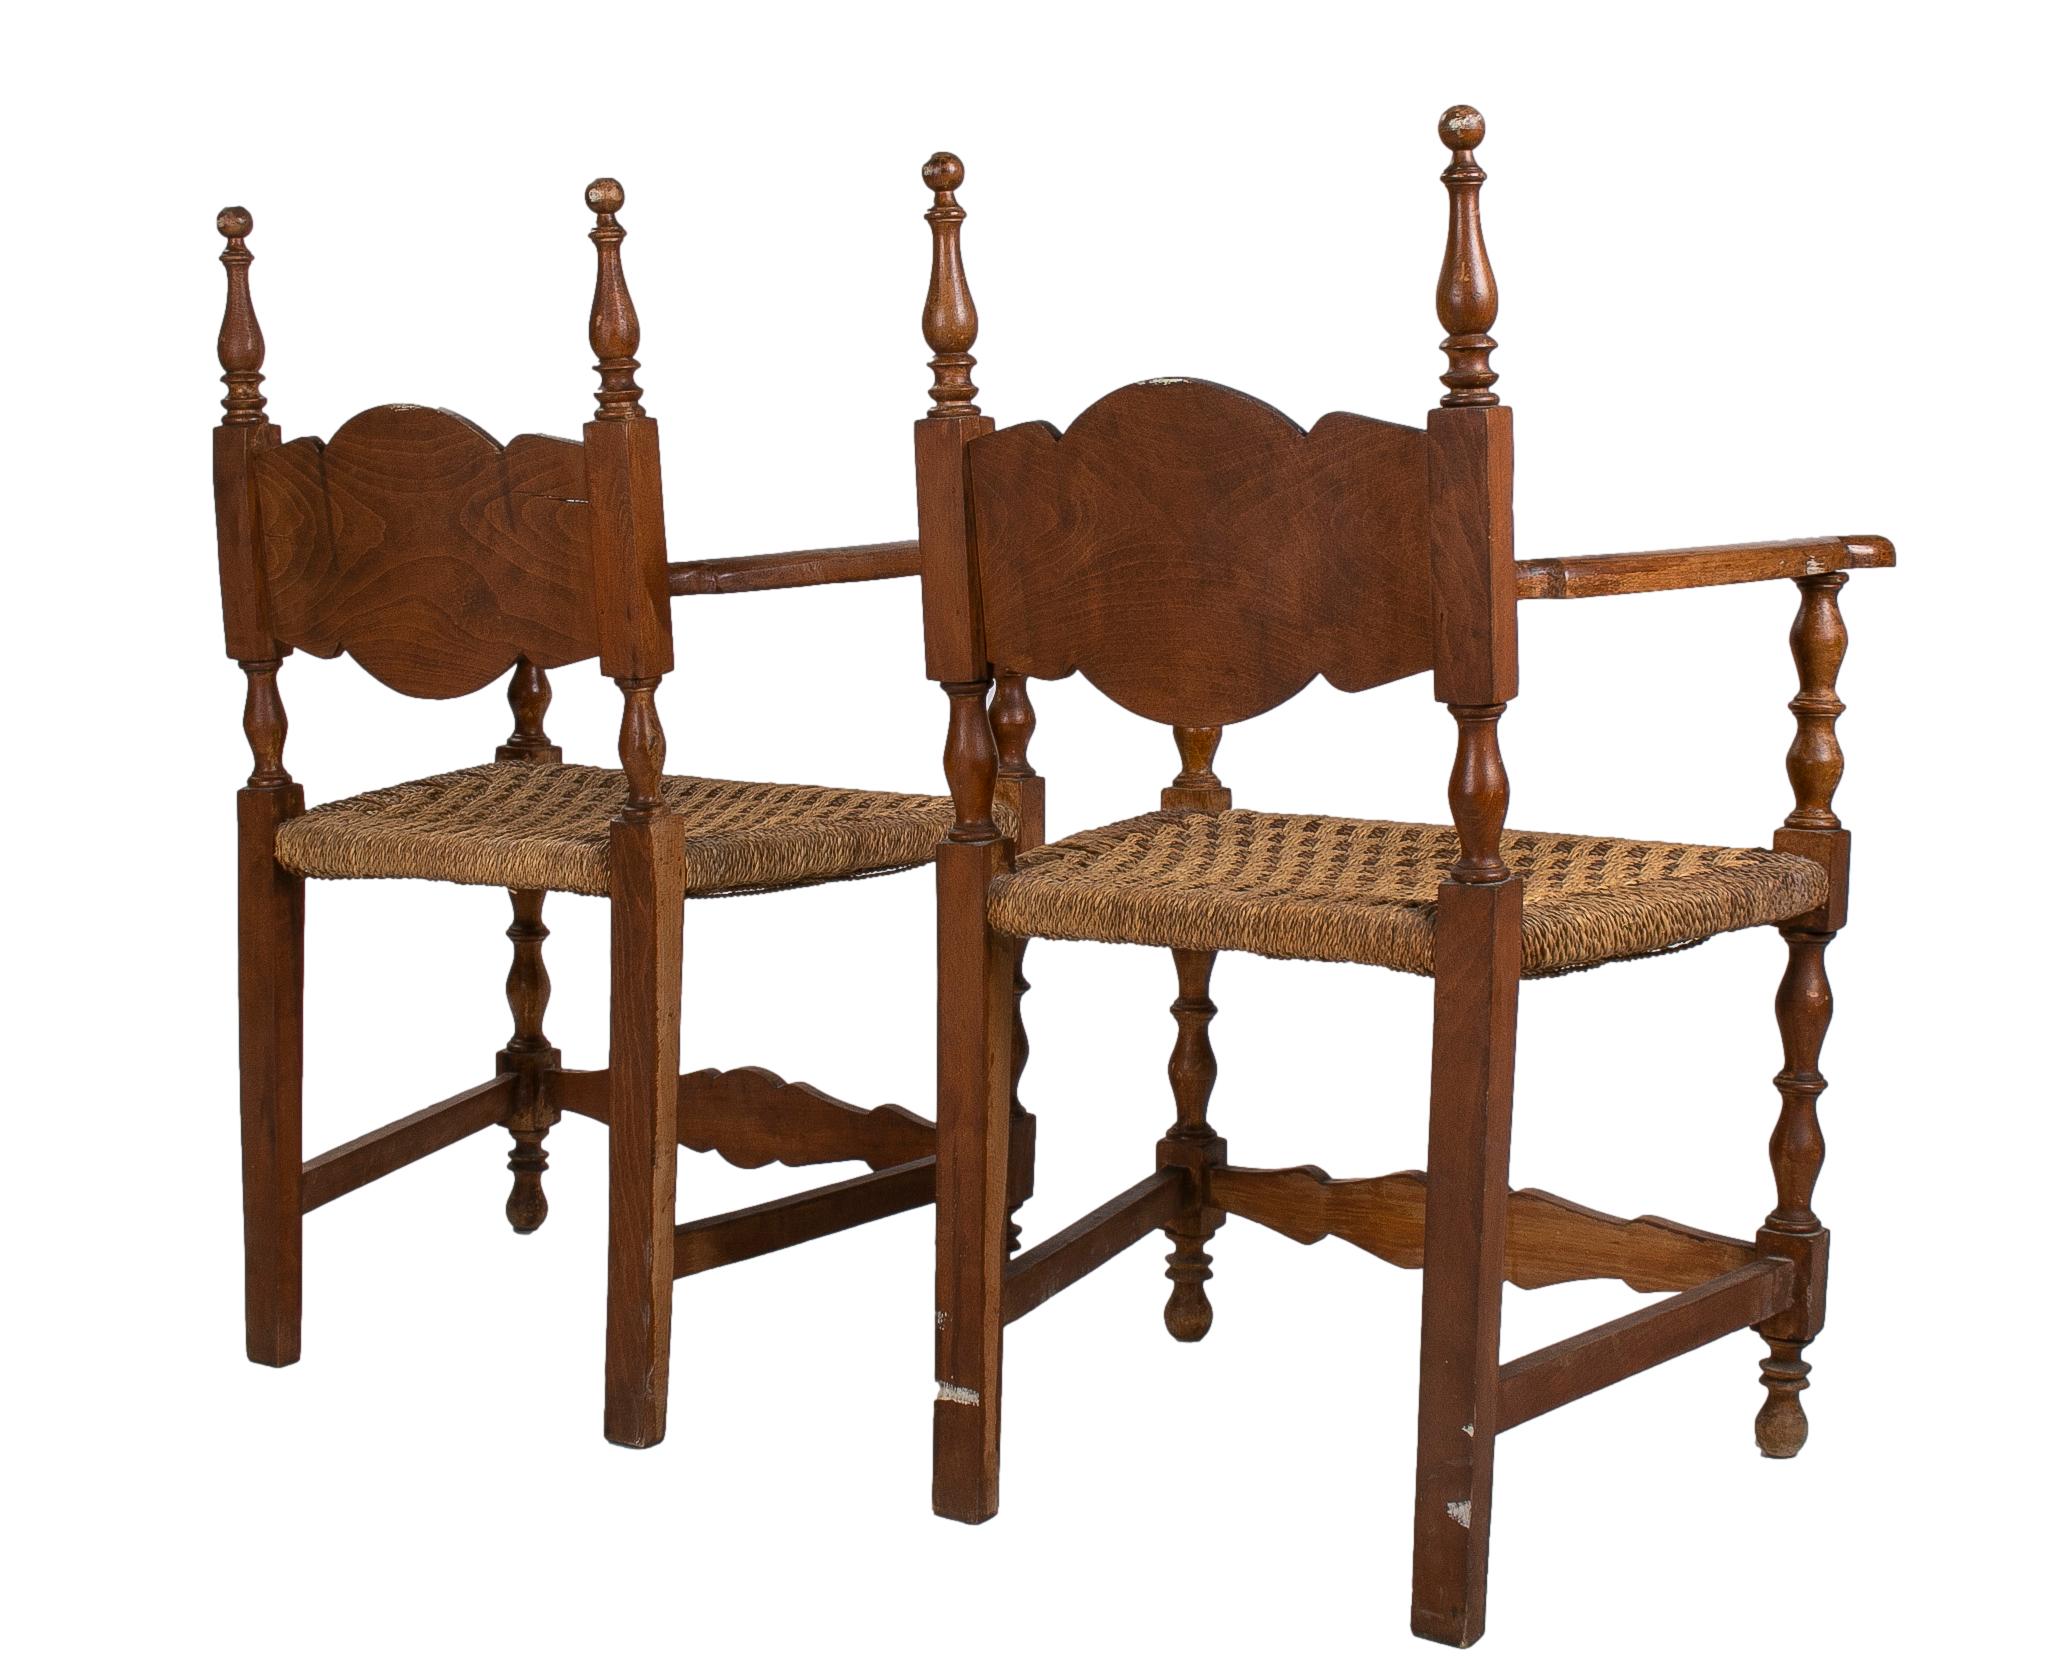 20th Century Pair of 1950s Spanish Wooden Chairs w/ Woven Dry Rope Seats For Sale